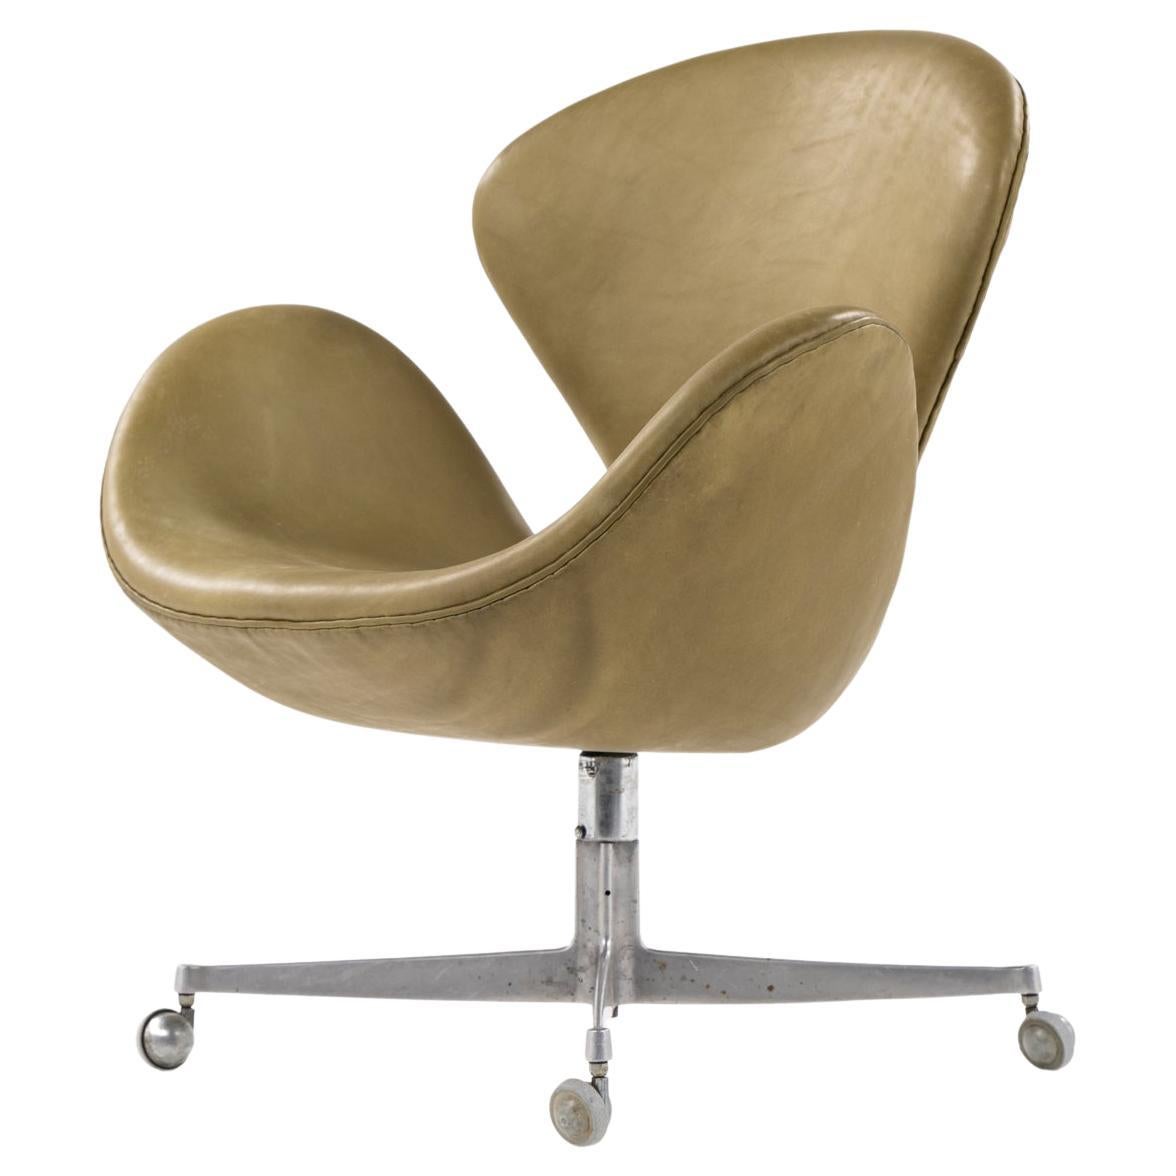 The Swan office chair by Arne Jacobsen For Sale